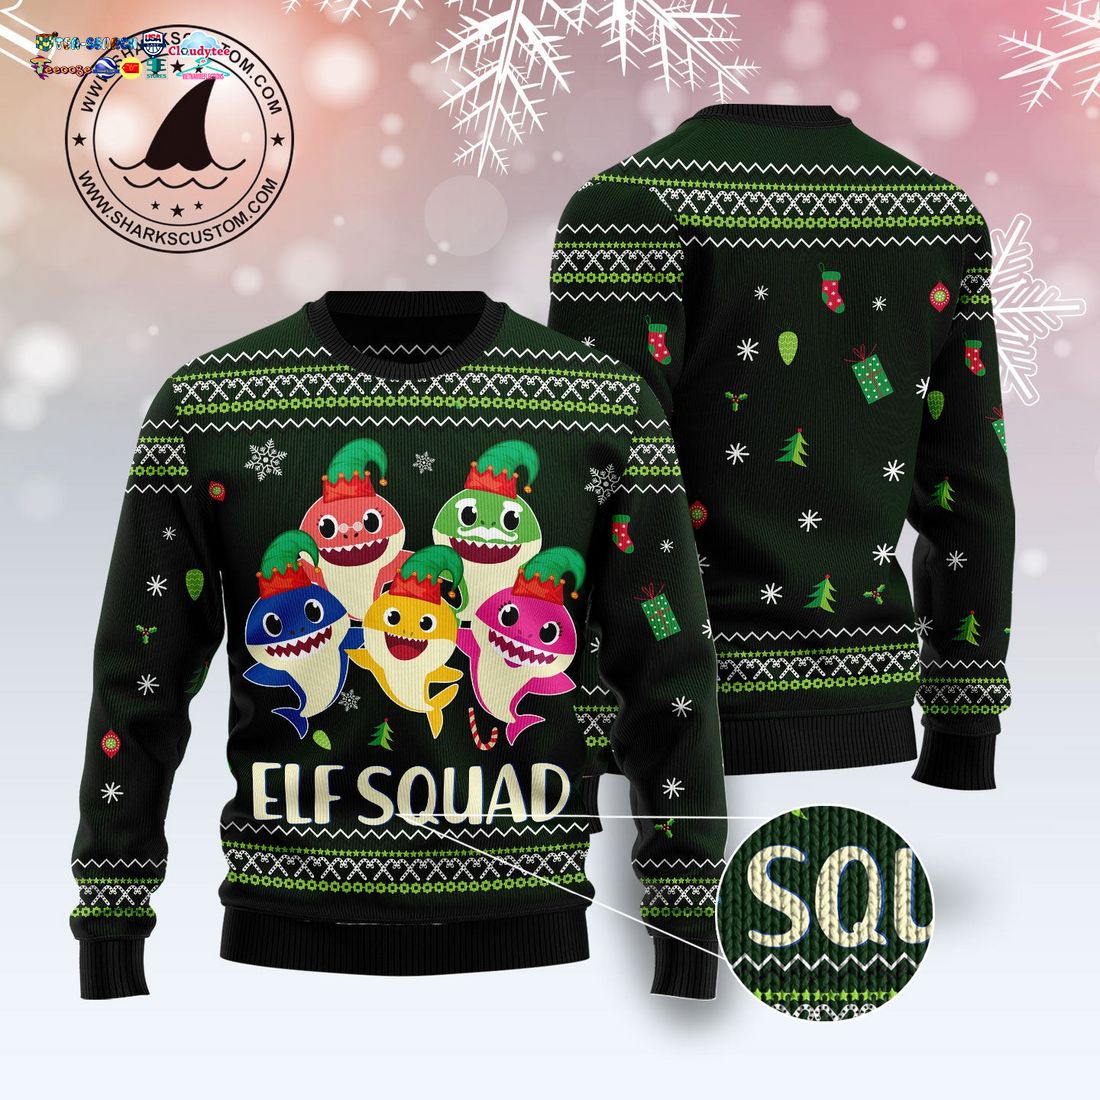 Baby Shark Elf Squad Ugly Christmas Sweater